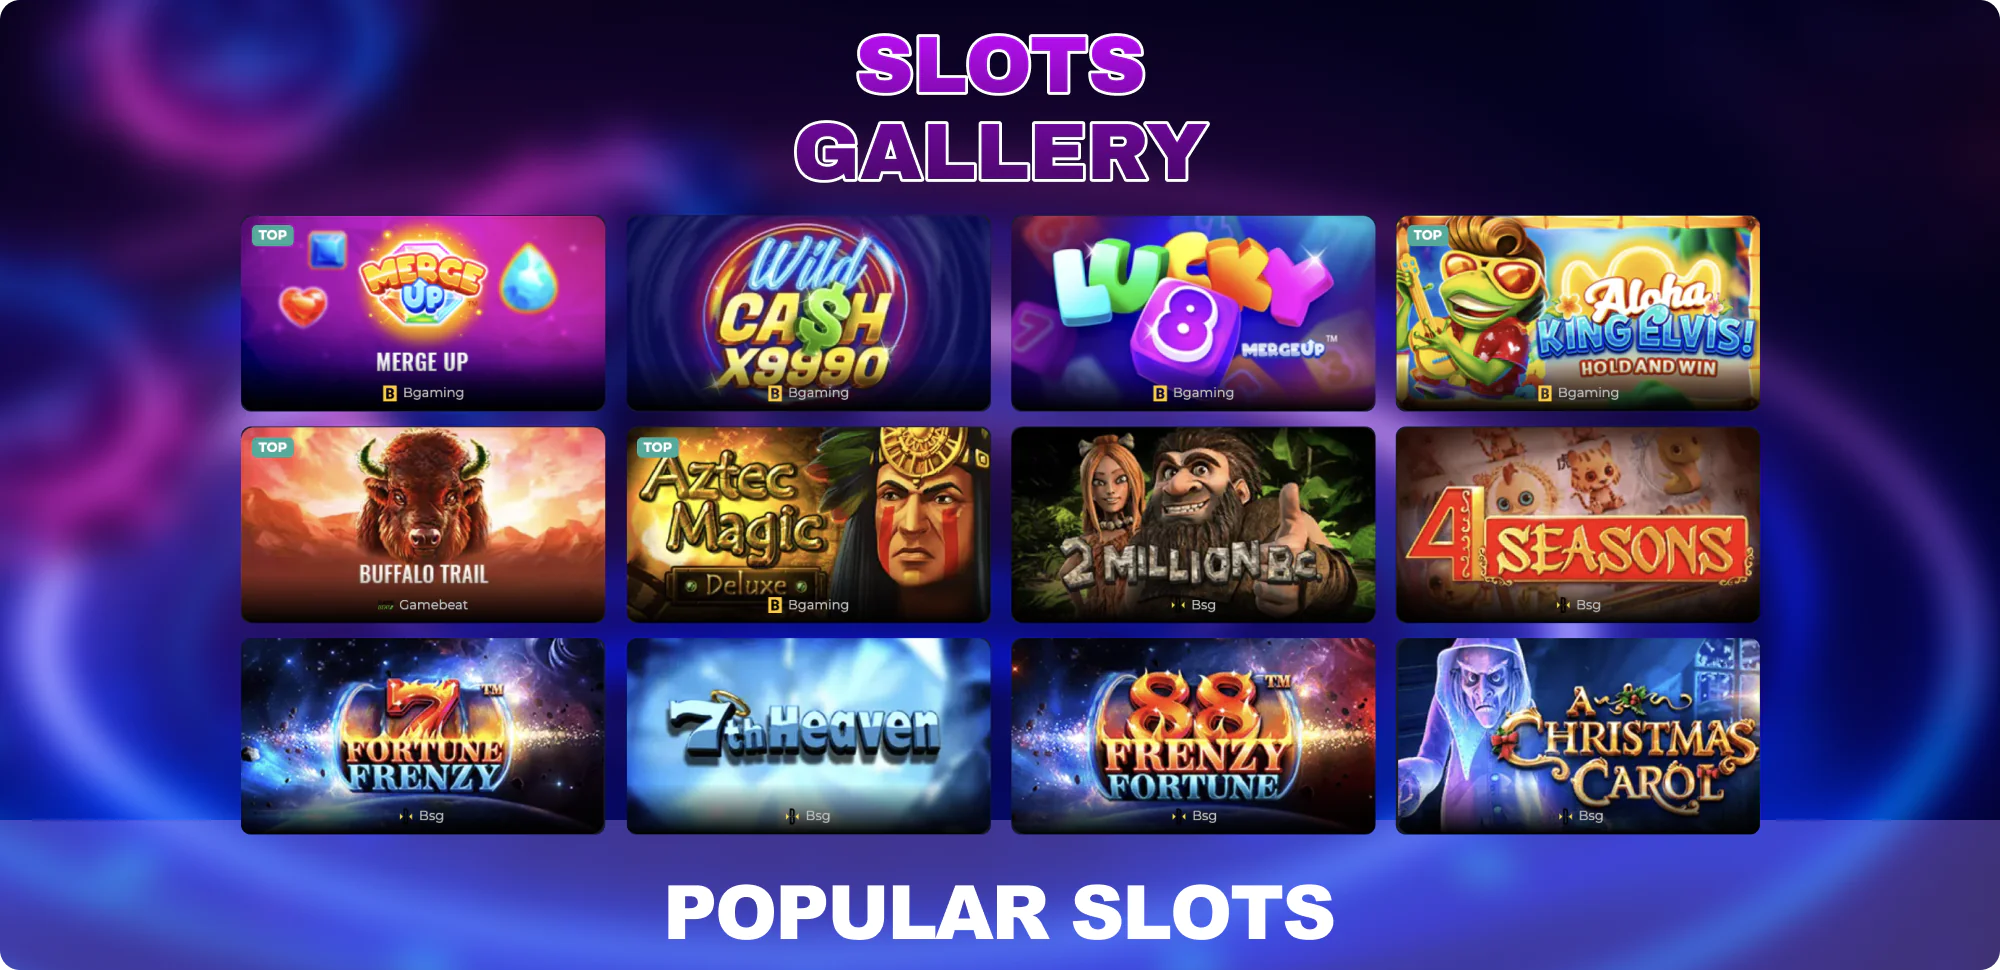 Slots Gallery Casino - the most popular slots collection